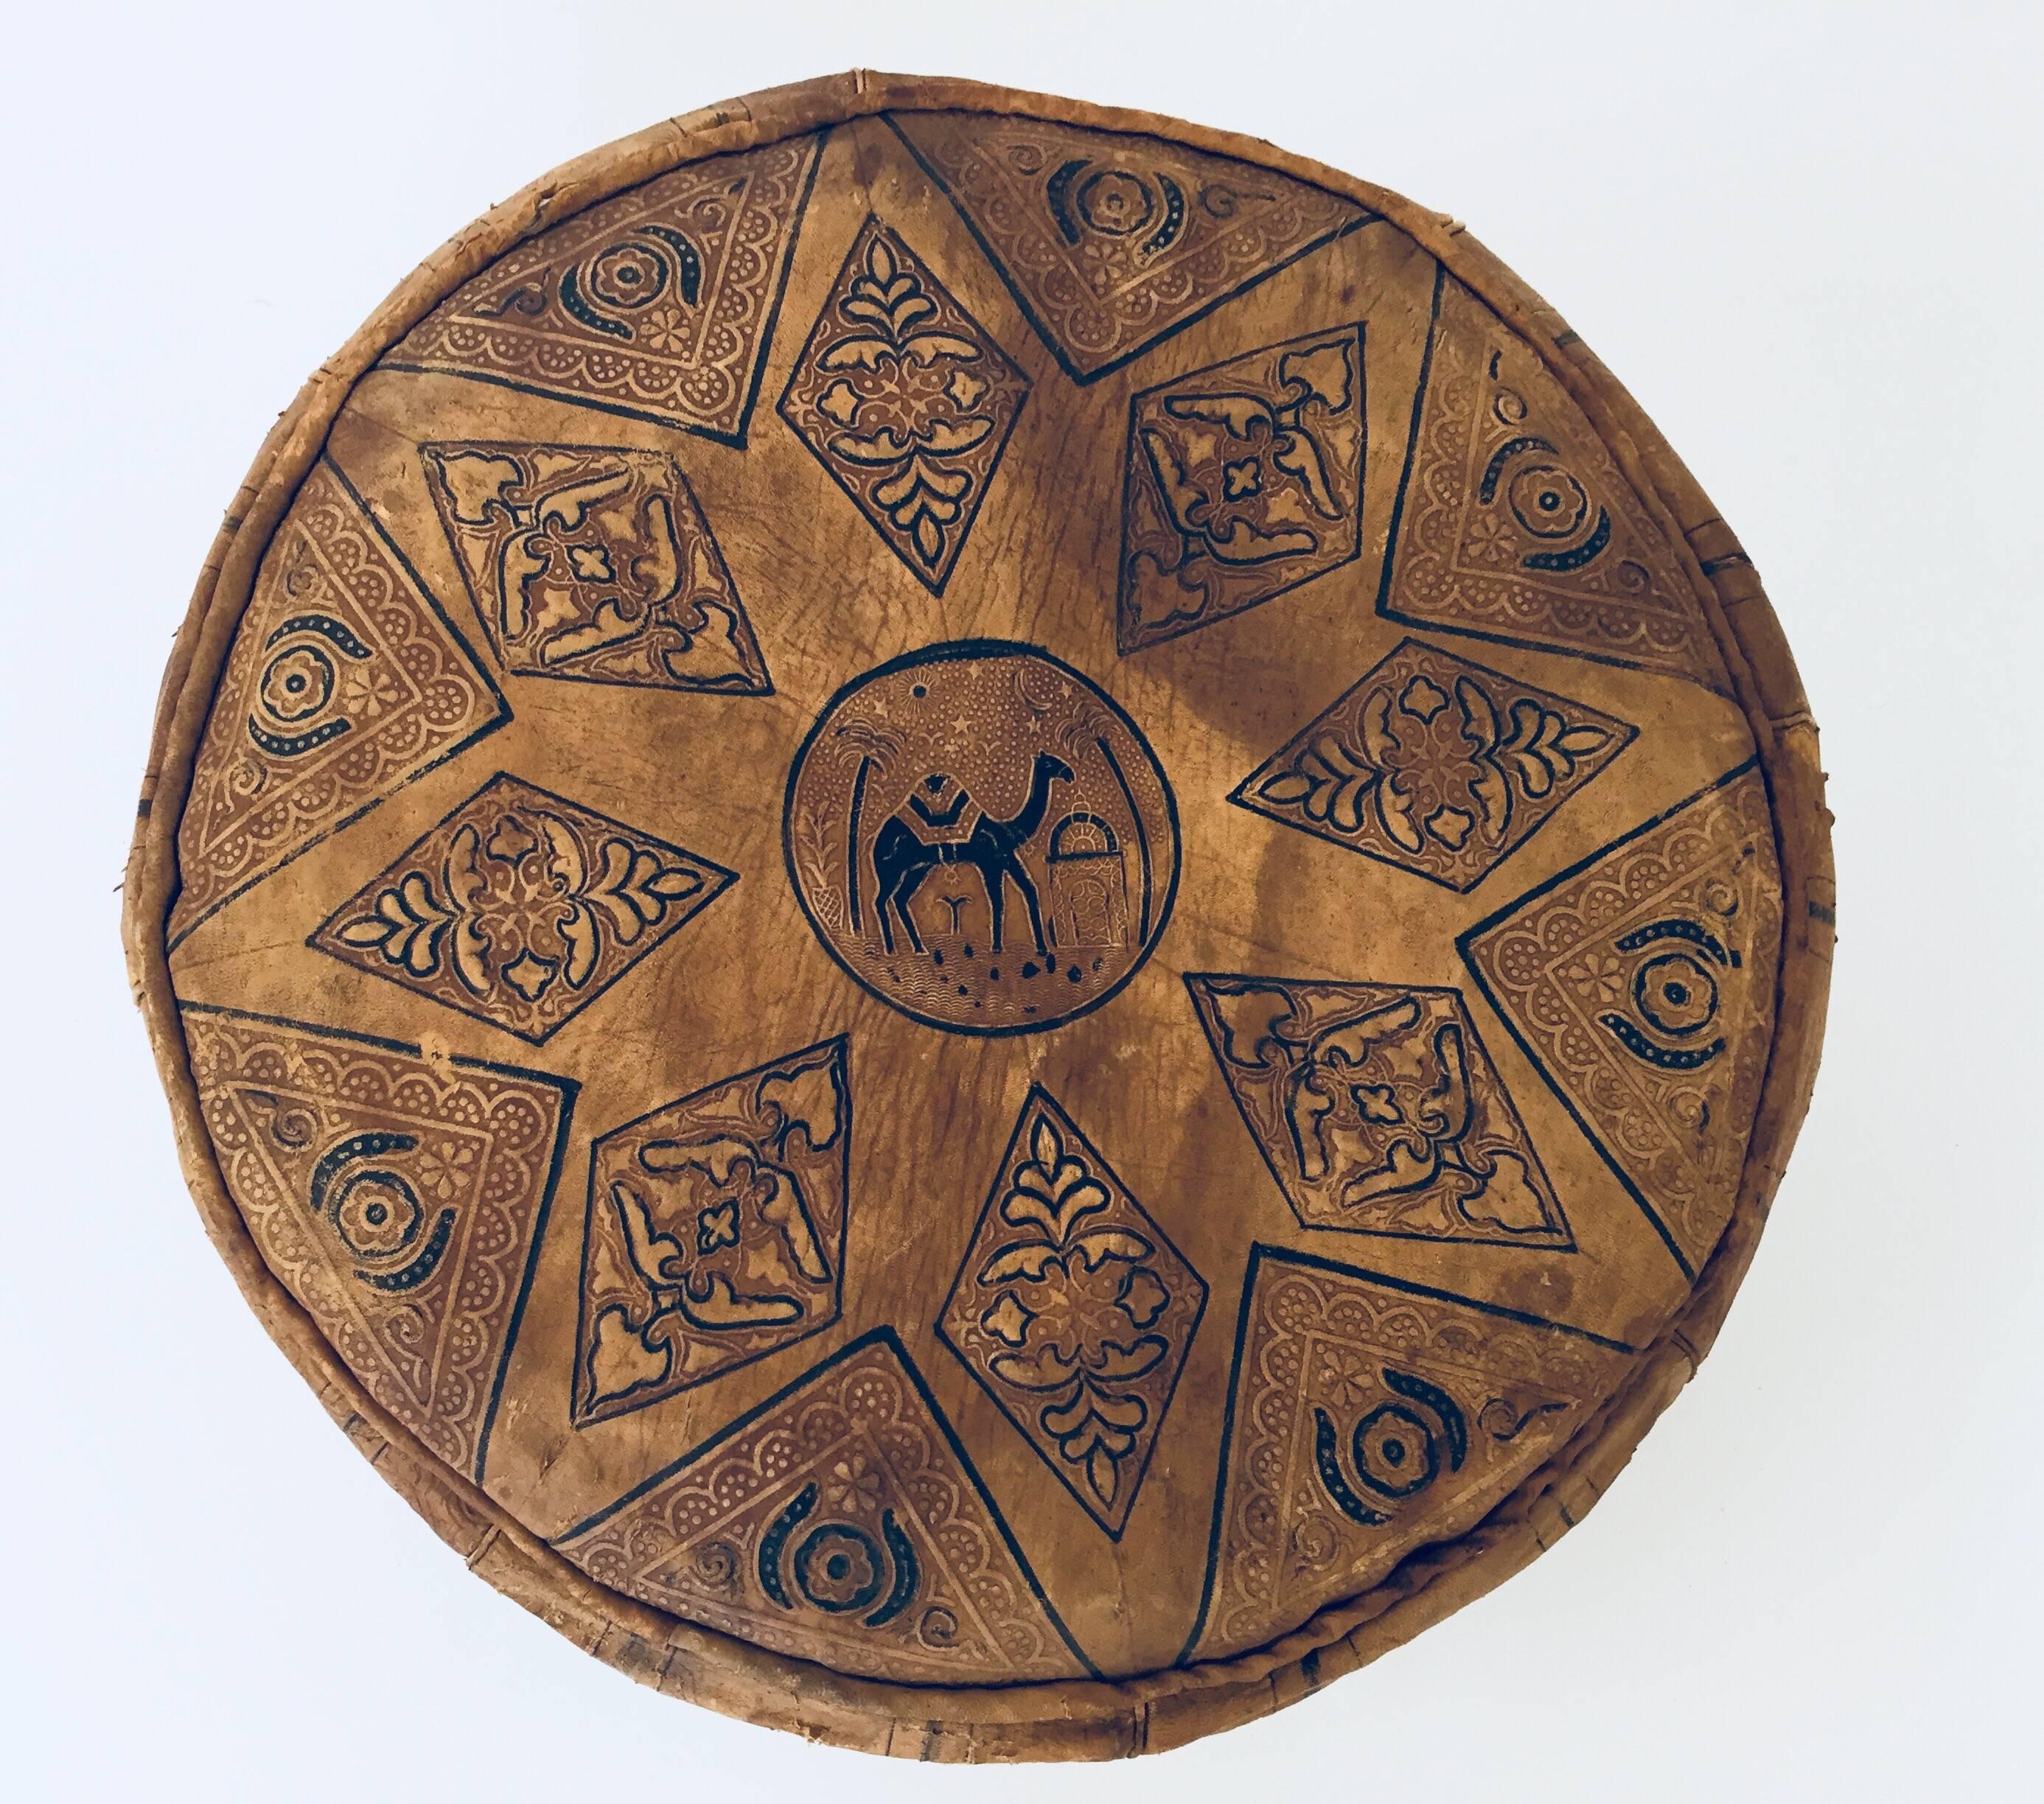 Moroccan brown round pouf hand tooled and embossed in Fez Morocco. 
Beautiful geometrical designs are hand-stitched and hand stamped on this Moroccan stool by expert Artisan. 
Distressed leather, damaged on one side.
Size is 18.5 in diameter x 9.5